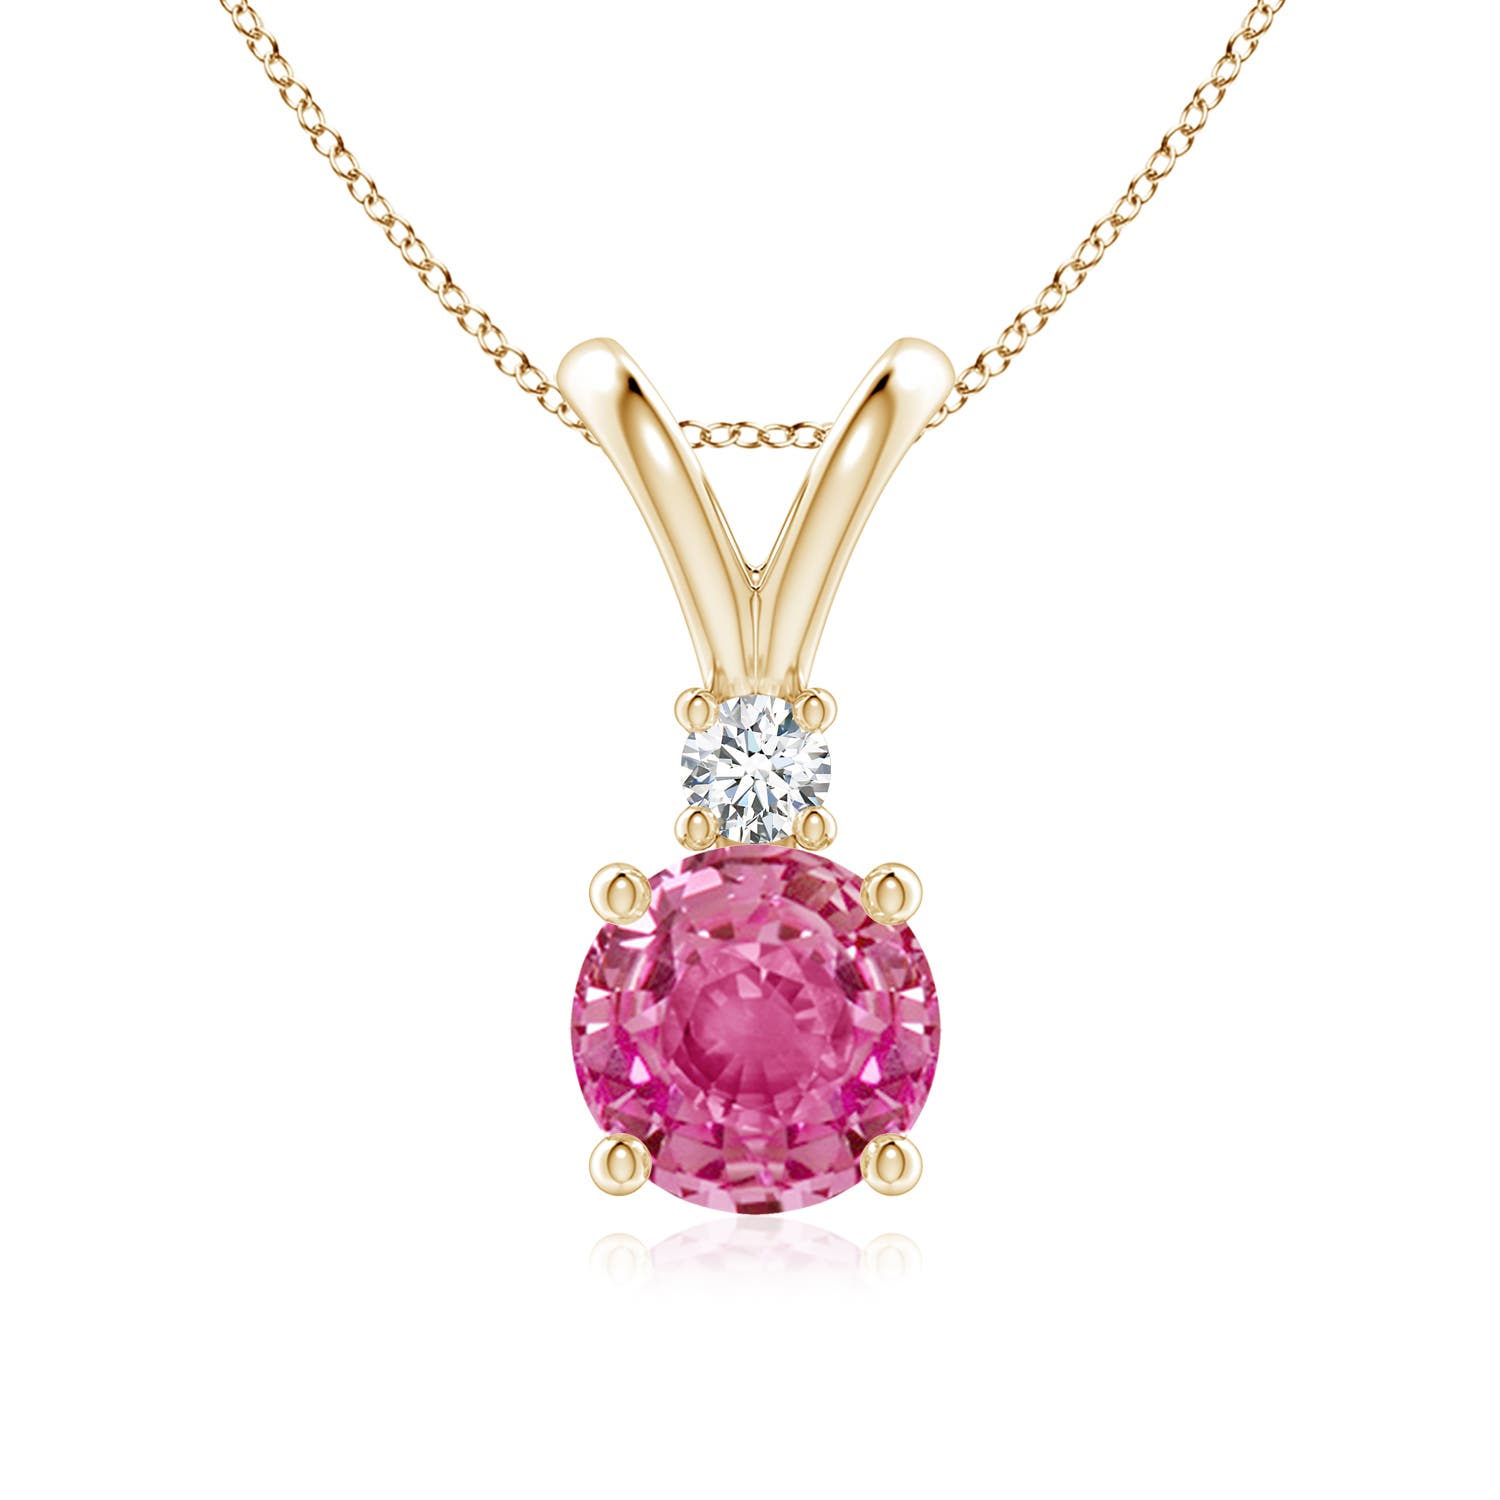 AAA - Pink Sapphire / 1.67 CT / 14 KT Yellow Gold